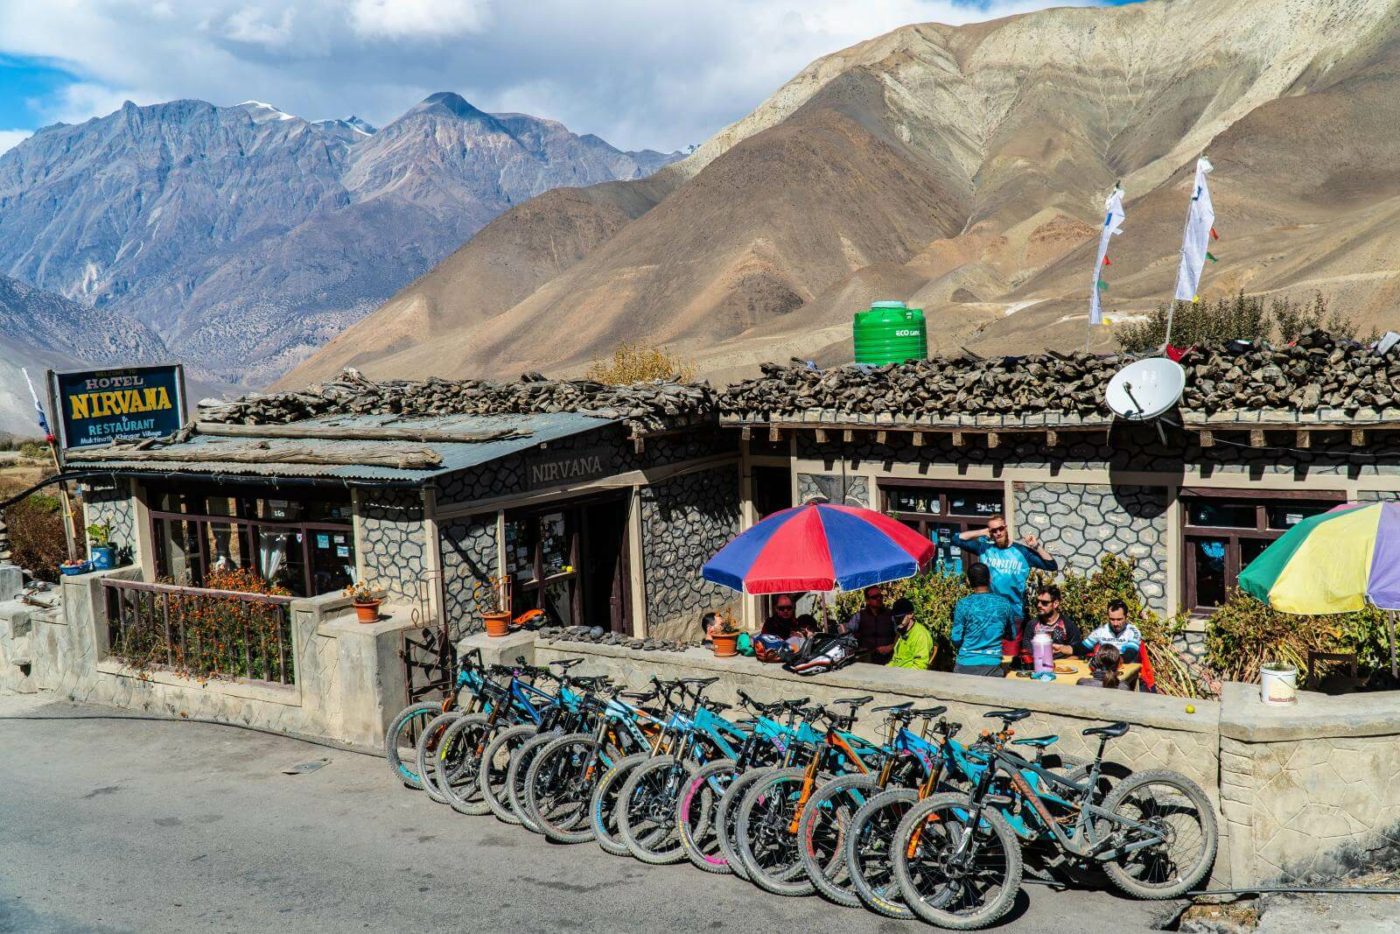 Hopping off the mountain bike for a break at the Hotel & Restaurant, "Nirvana" - which is pretty much what this tour in Nepal equates to!